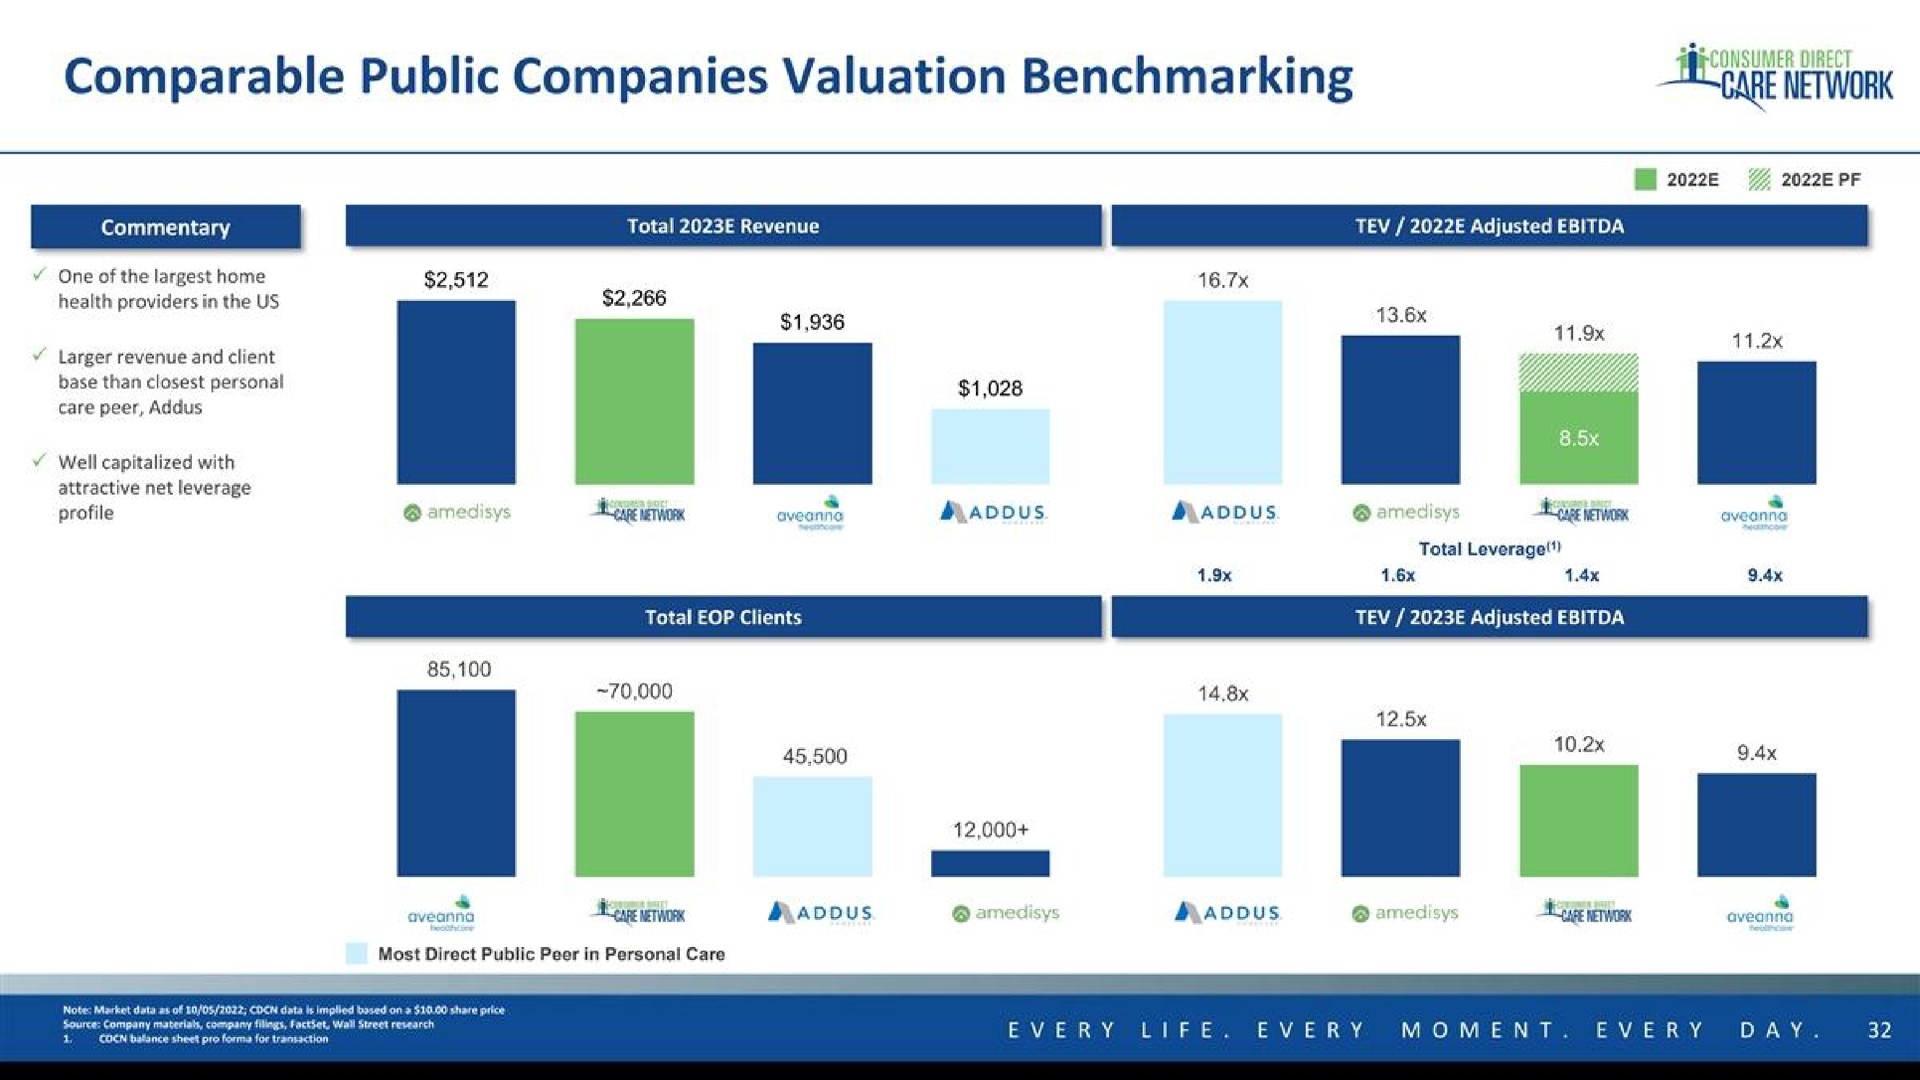 comparable public companies valuation work | Consumer Direct Care Network